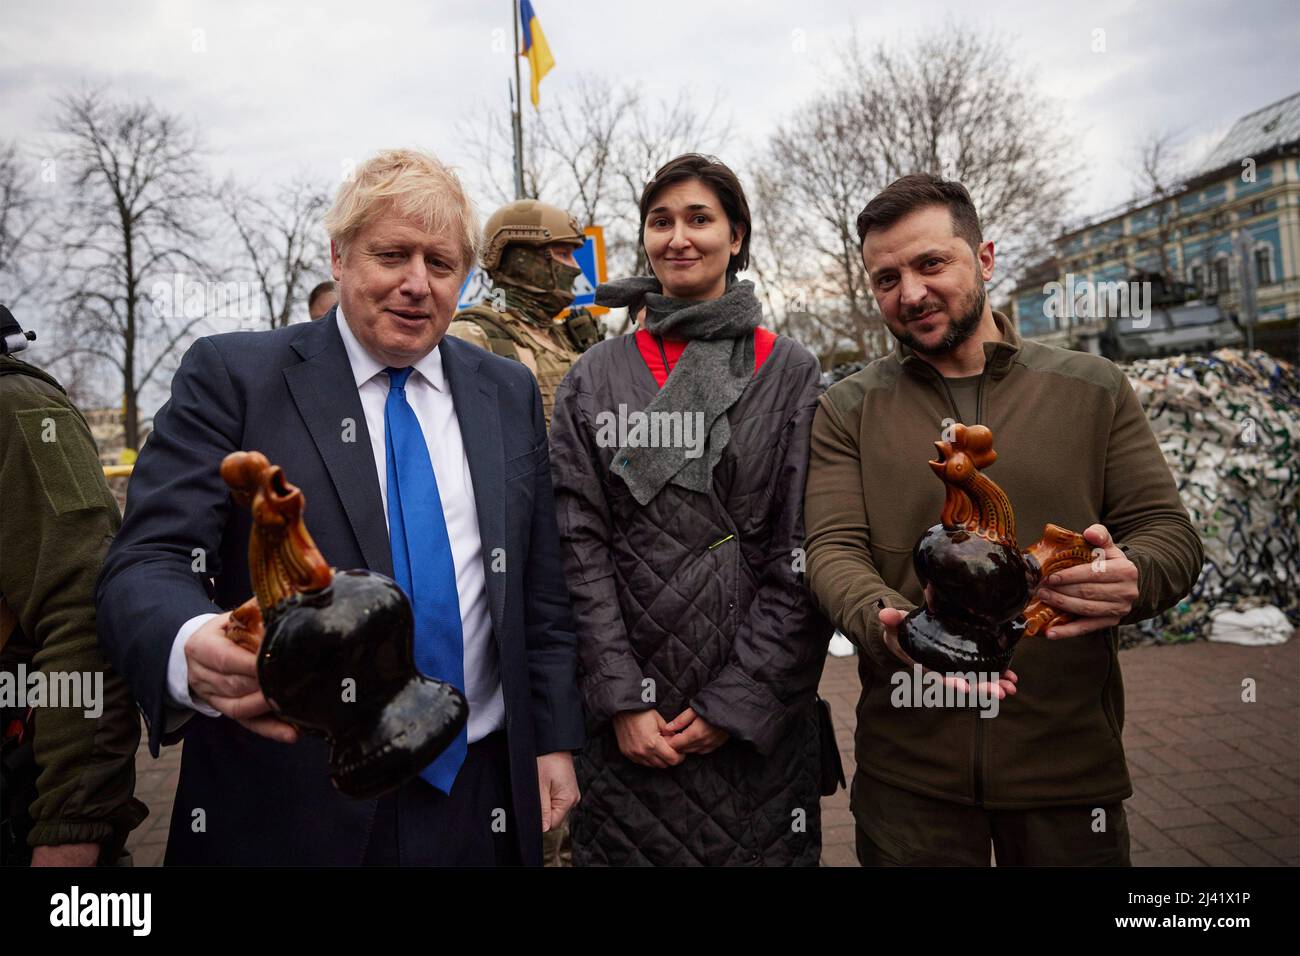 Kyiv, Ukraine. 09 April, 2022. Ukrainian President Volodymyr Zelenskyy, right, and British Prime Minister Boris Johnson, left, hold souvenirs gifted them by a resident, during a walk through the streets of the capital following bilateral discussions, April 9, 2022 in Kyiv, Ukraine.  Credit: Ukraine Presidency/Ukraine Presidency/Alamy Live News Stock Photo